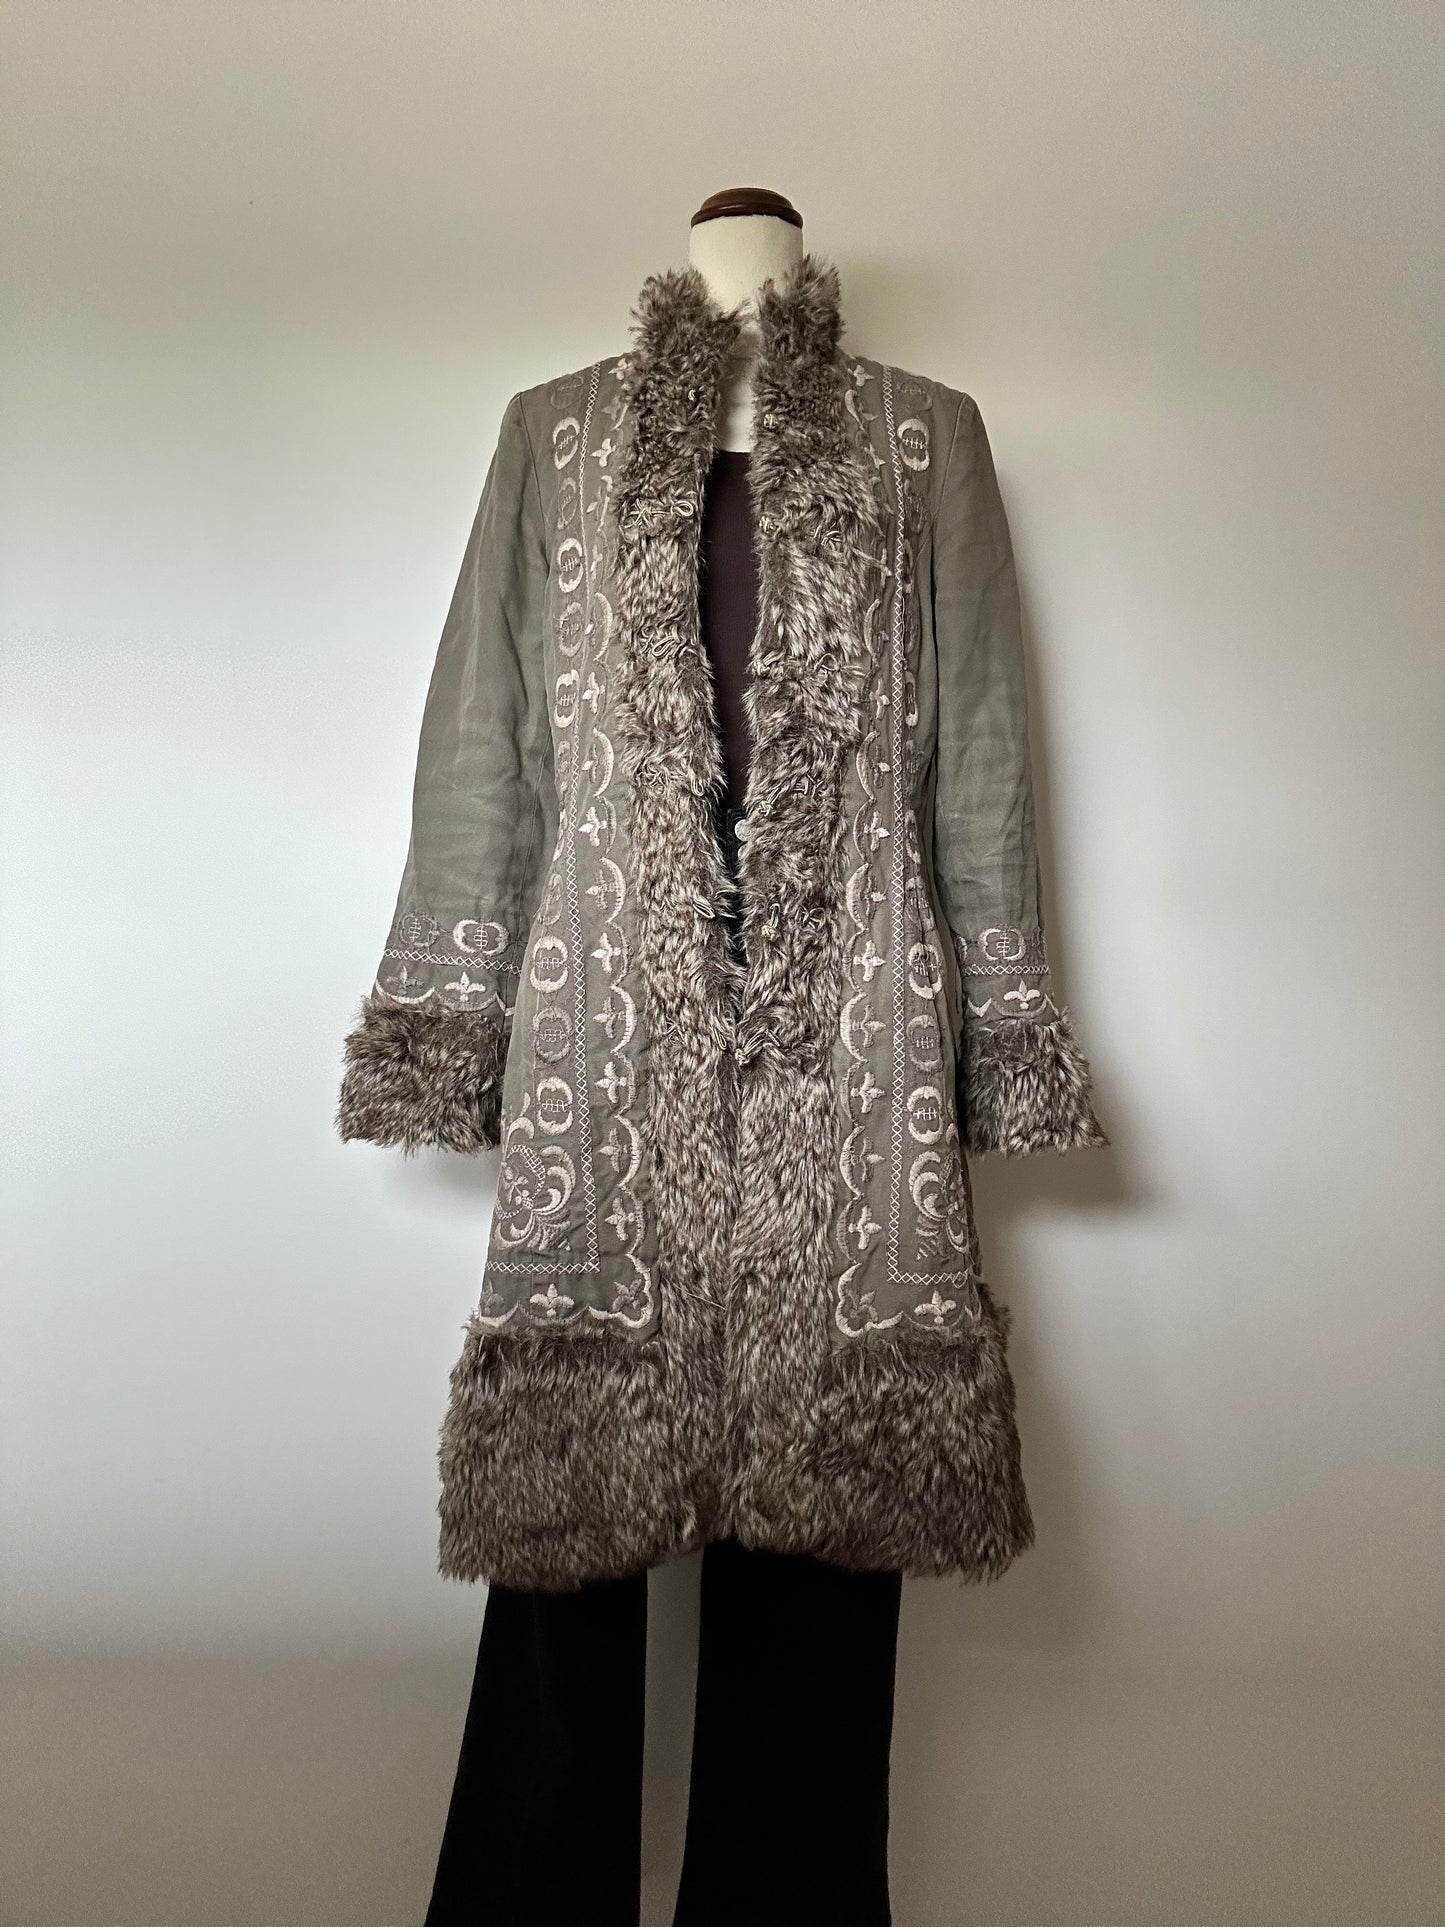 Embroidered Canvas 'Penny Lane' Coat (6-10)